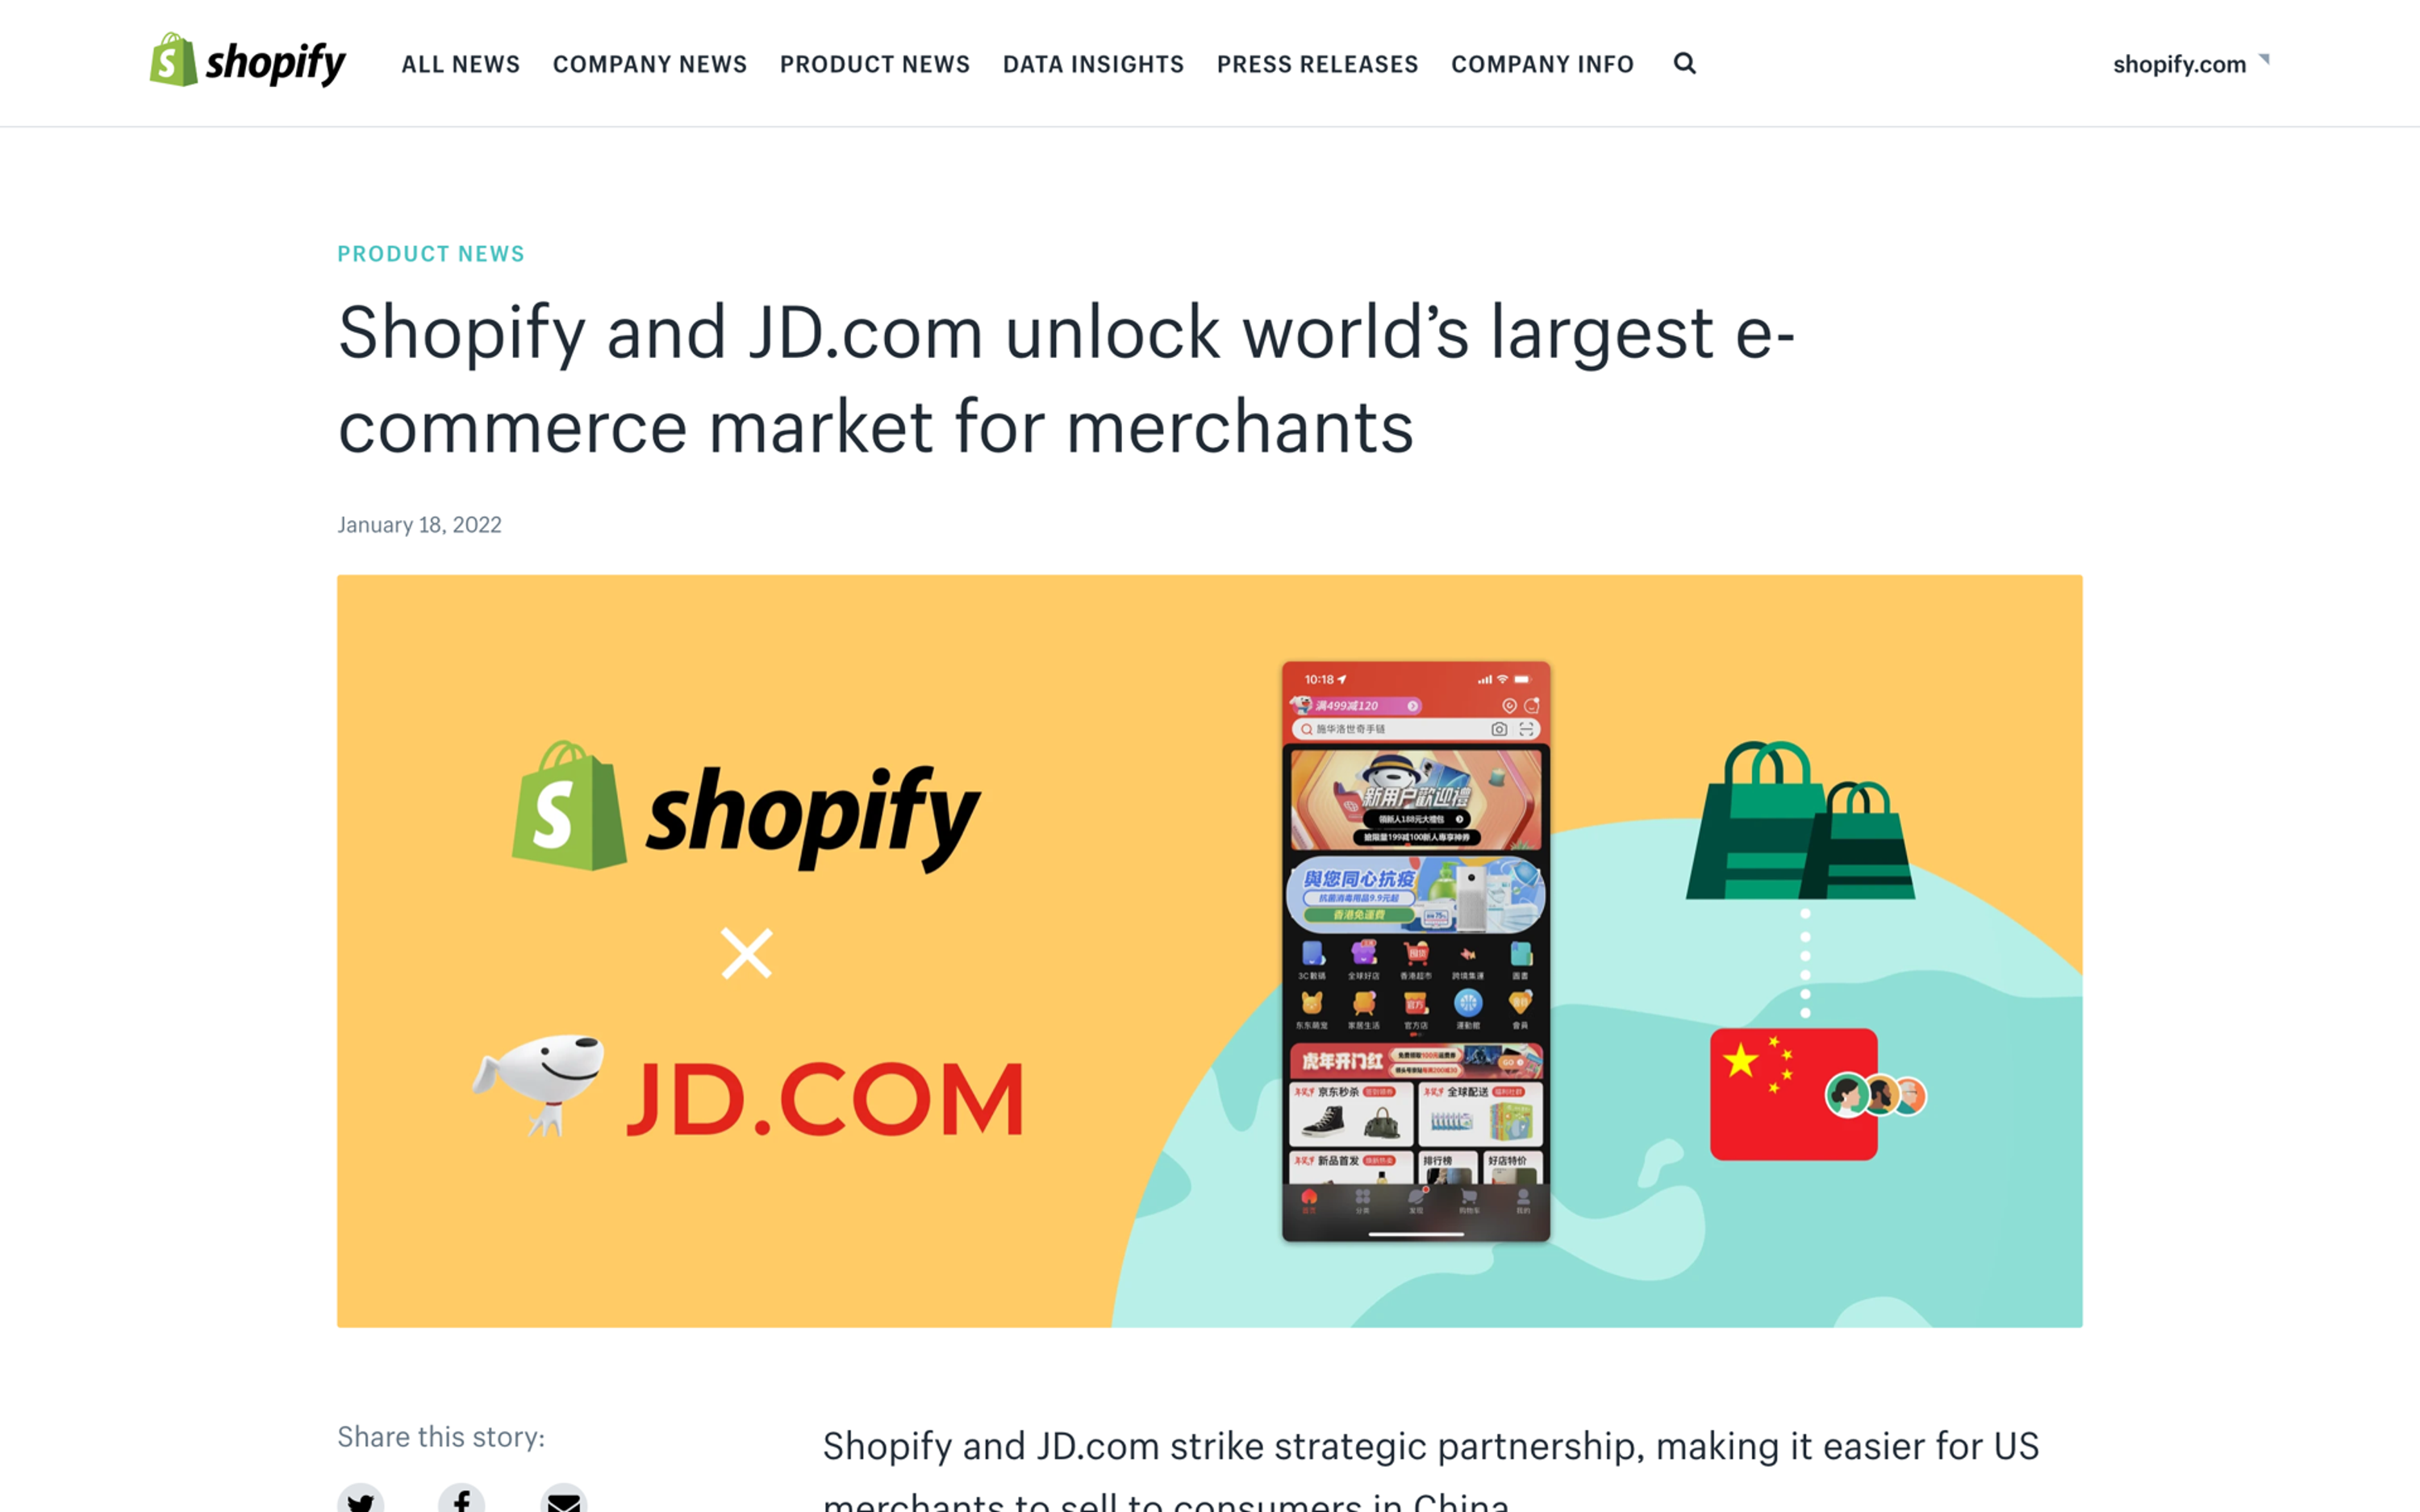 Video helps tell the story in Shopify x JD.com launch